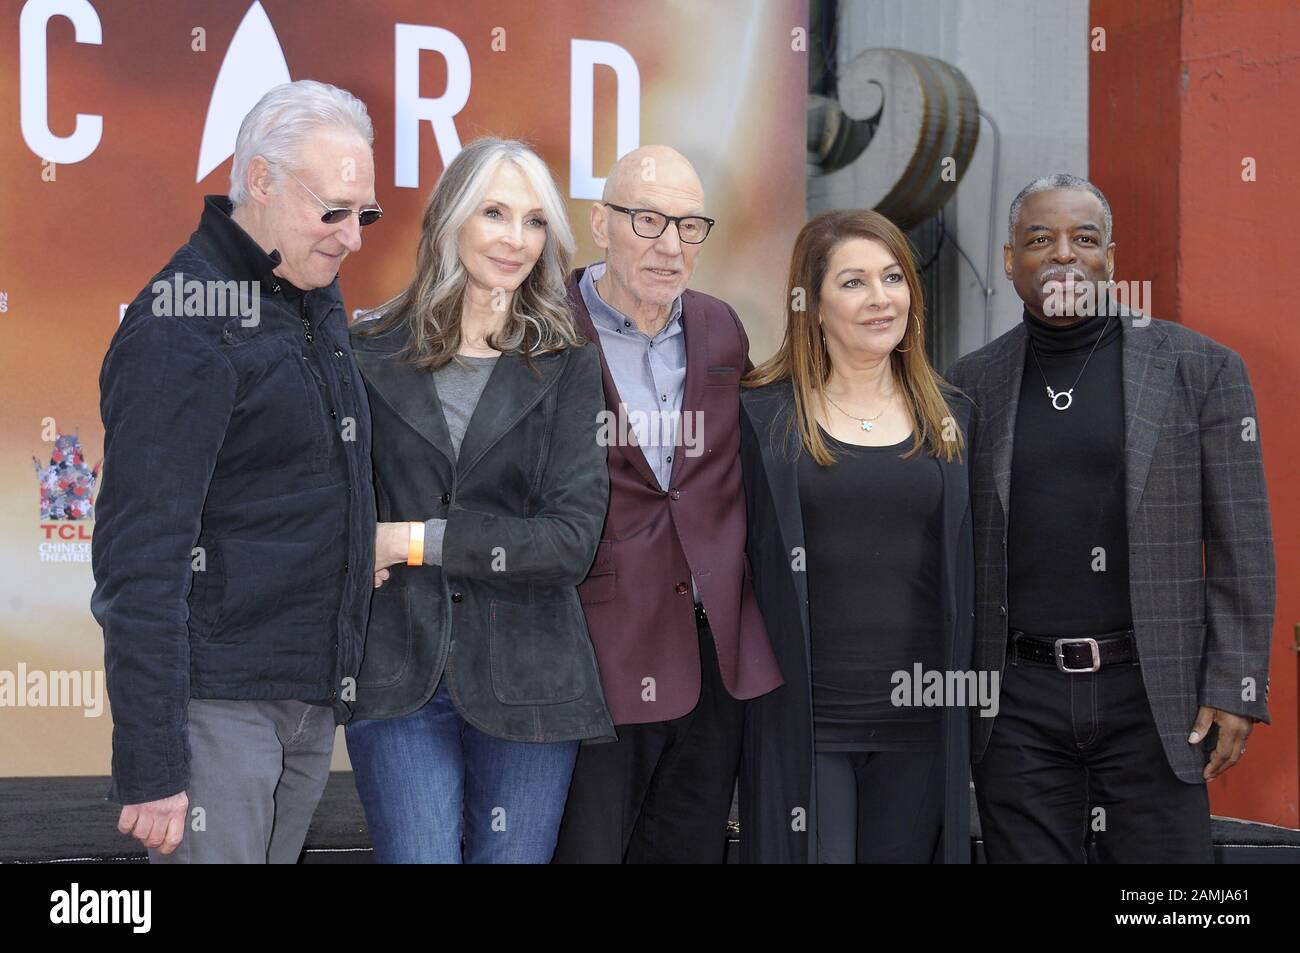 Los Angeles, CA. 13th Jan, 2020. Brent Spiner, Gates McFadden, Sir Patrick Stewart, Marina Sirtis, LeVar Burton at the induction ceremony for Star on the Hollywood Walk of Fame for Sir Patrick Stewart, Hollywood Boulevard, Los Angeles, CA January 13, 2020. Credit: Michael Germana/Everett Collection/Alamy Live News Stock Photo